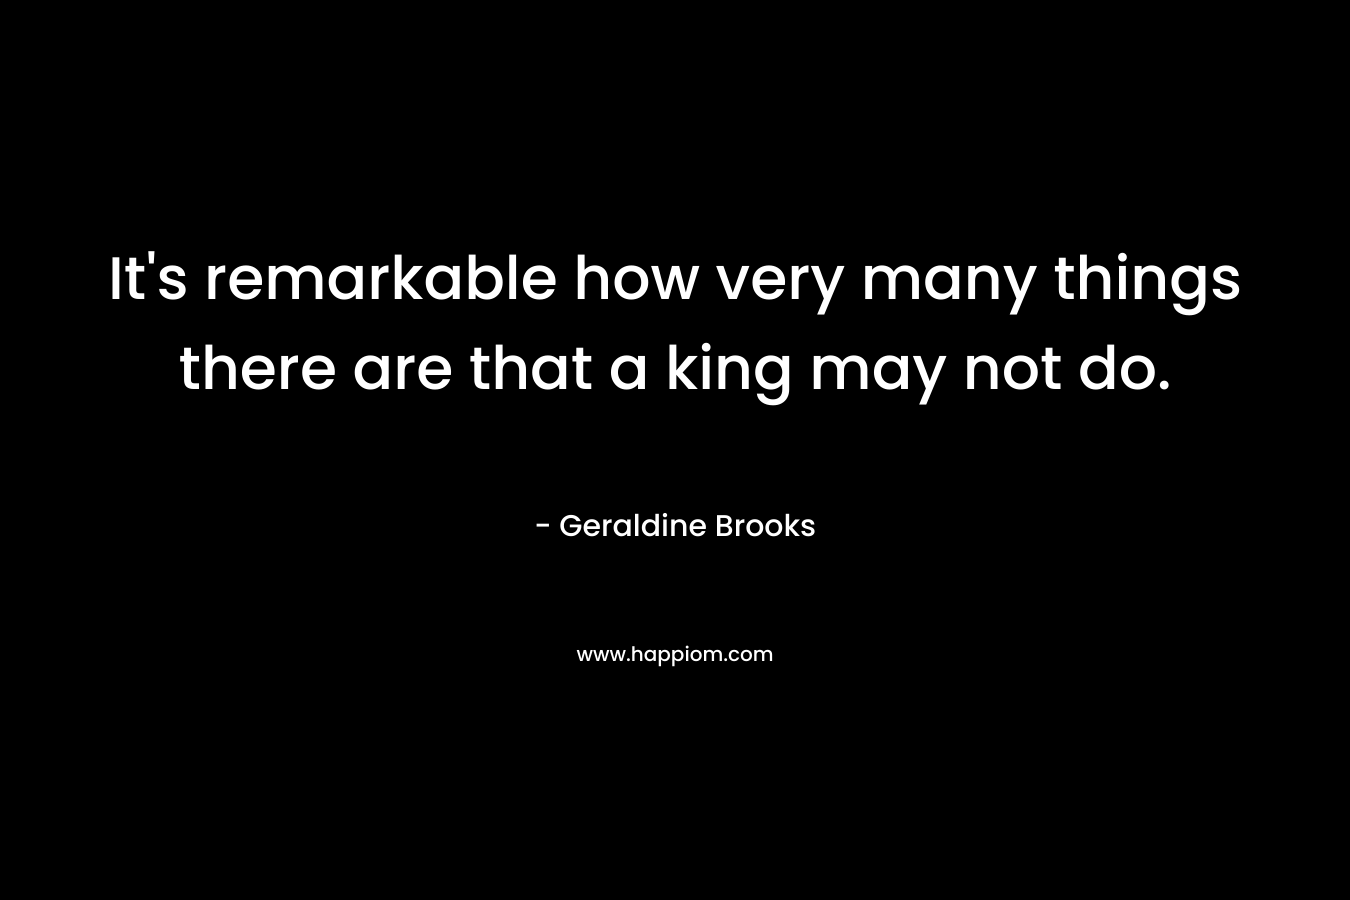 It’s remarkable how very many things there are that a king may not do. – Geraldine Brooks